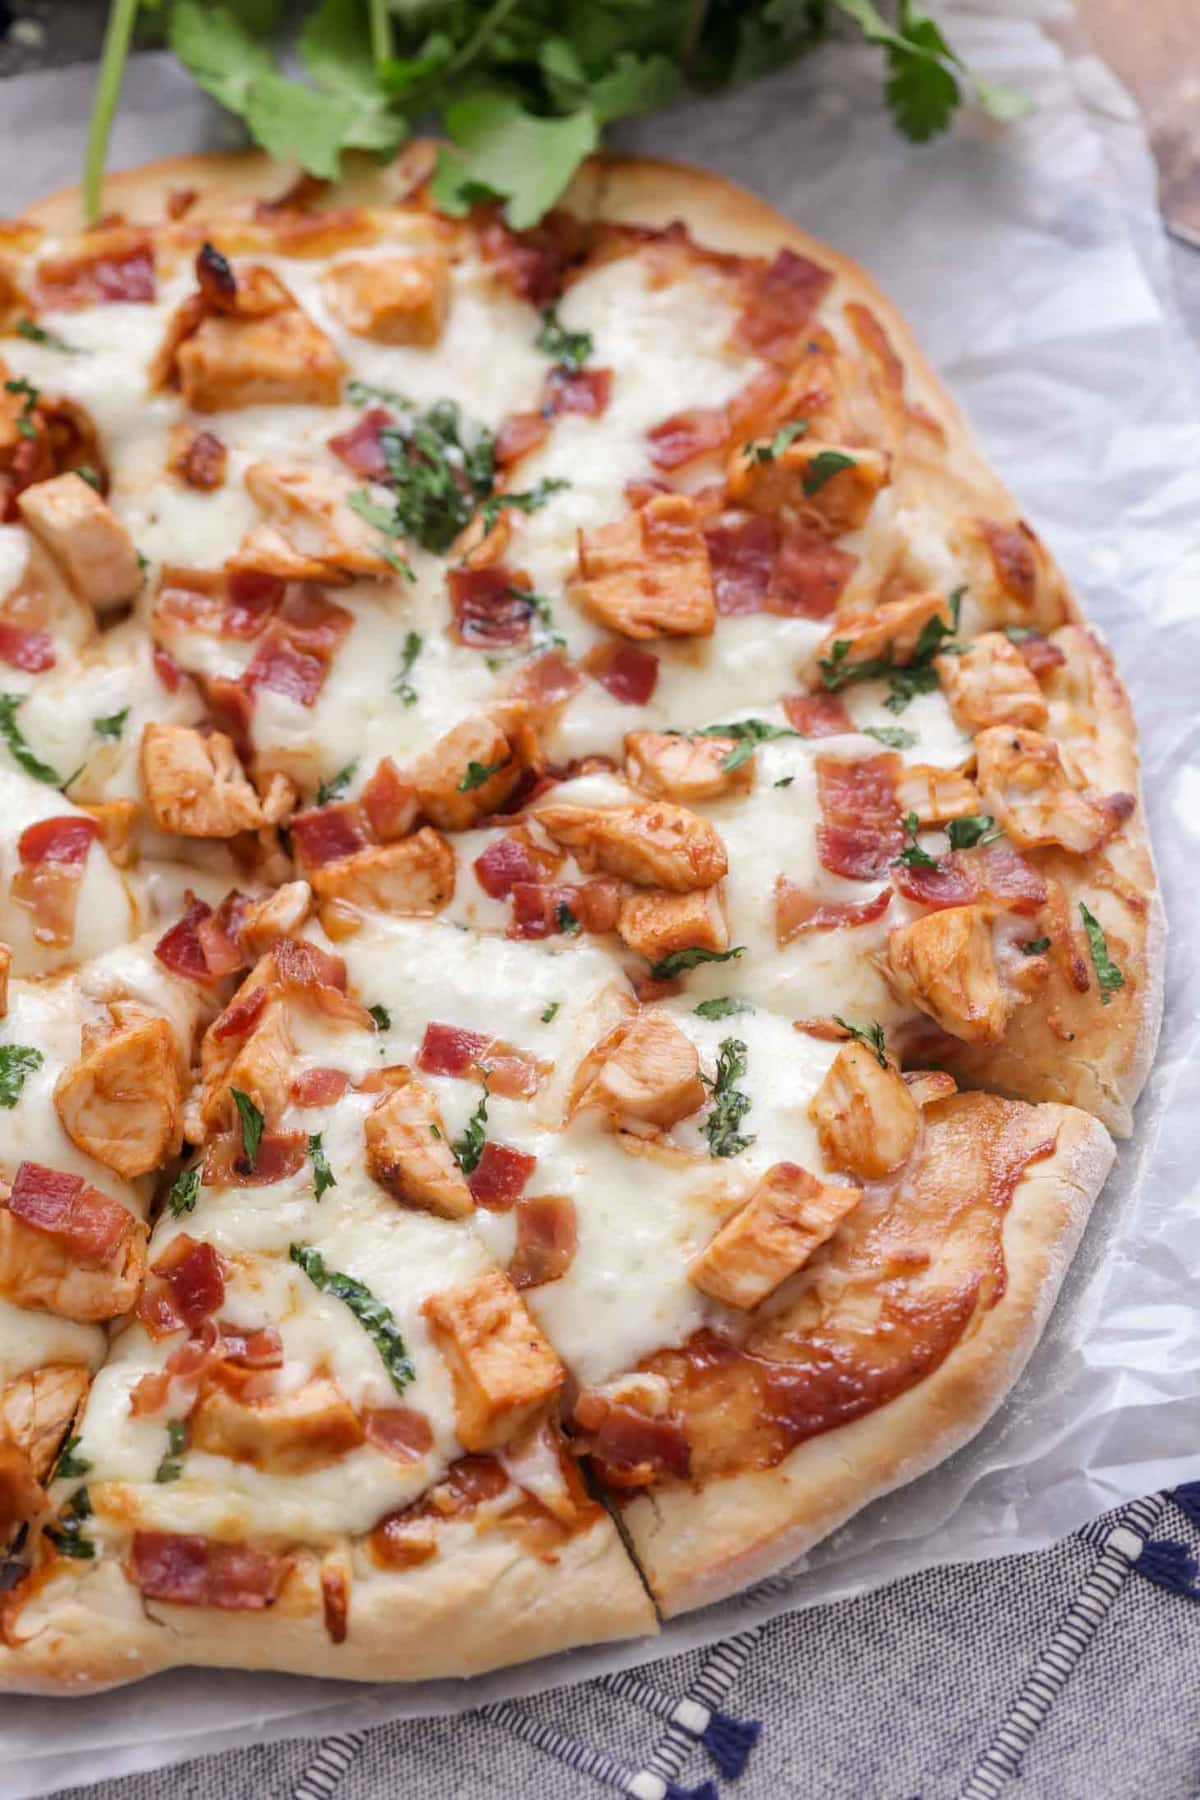 Bbq Chicken Pizza Recipe
 BBQ Chicken Pizza Recipe Made in 20 Minutes 